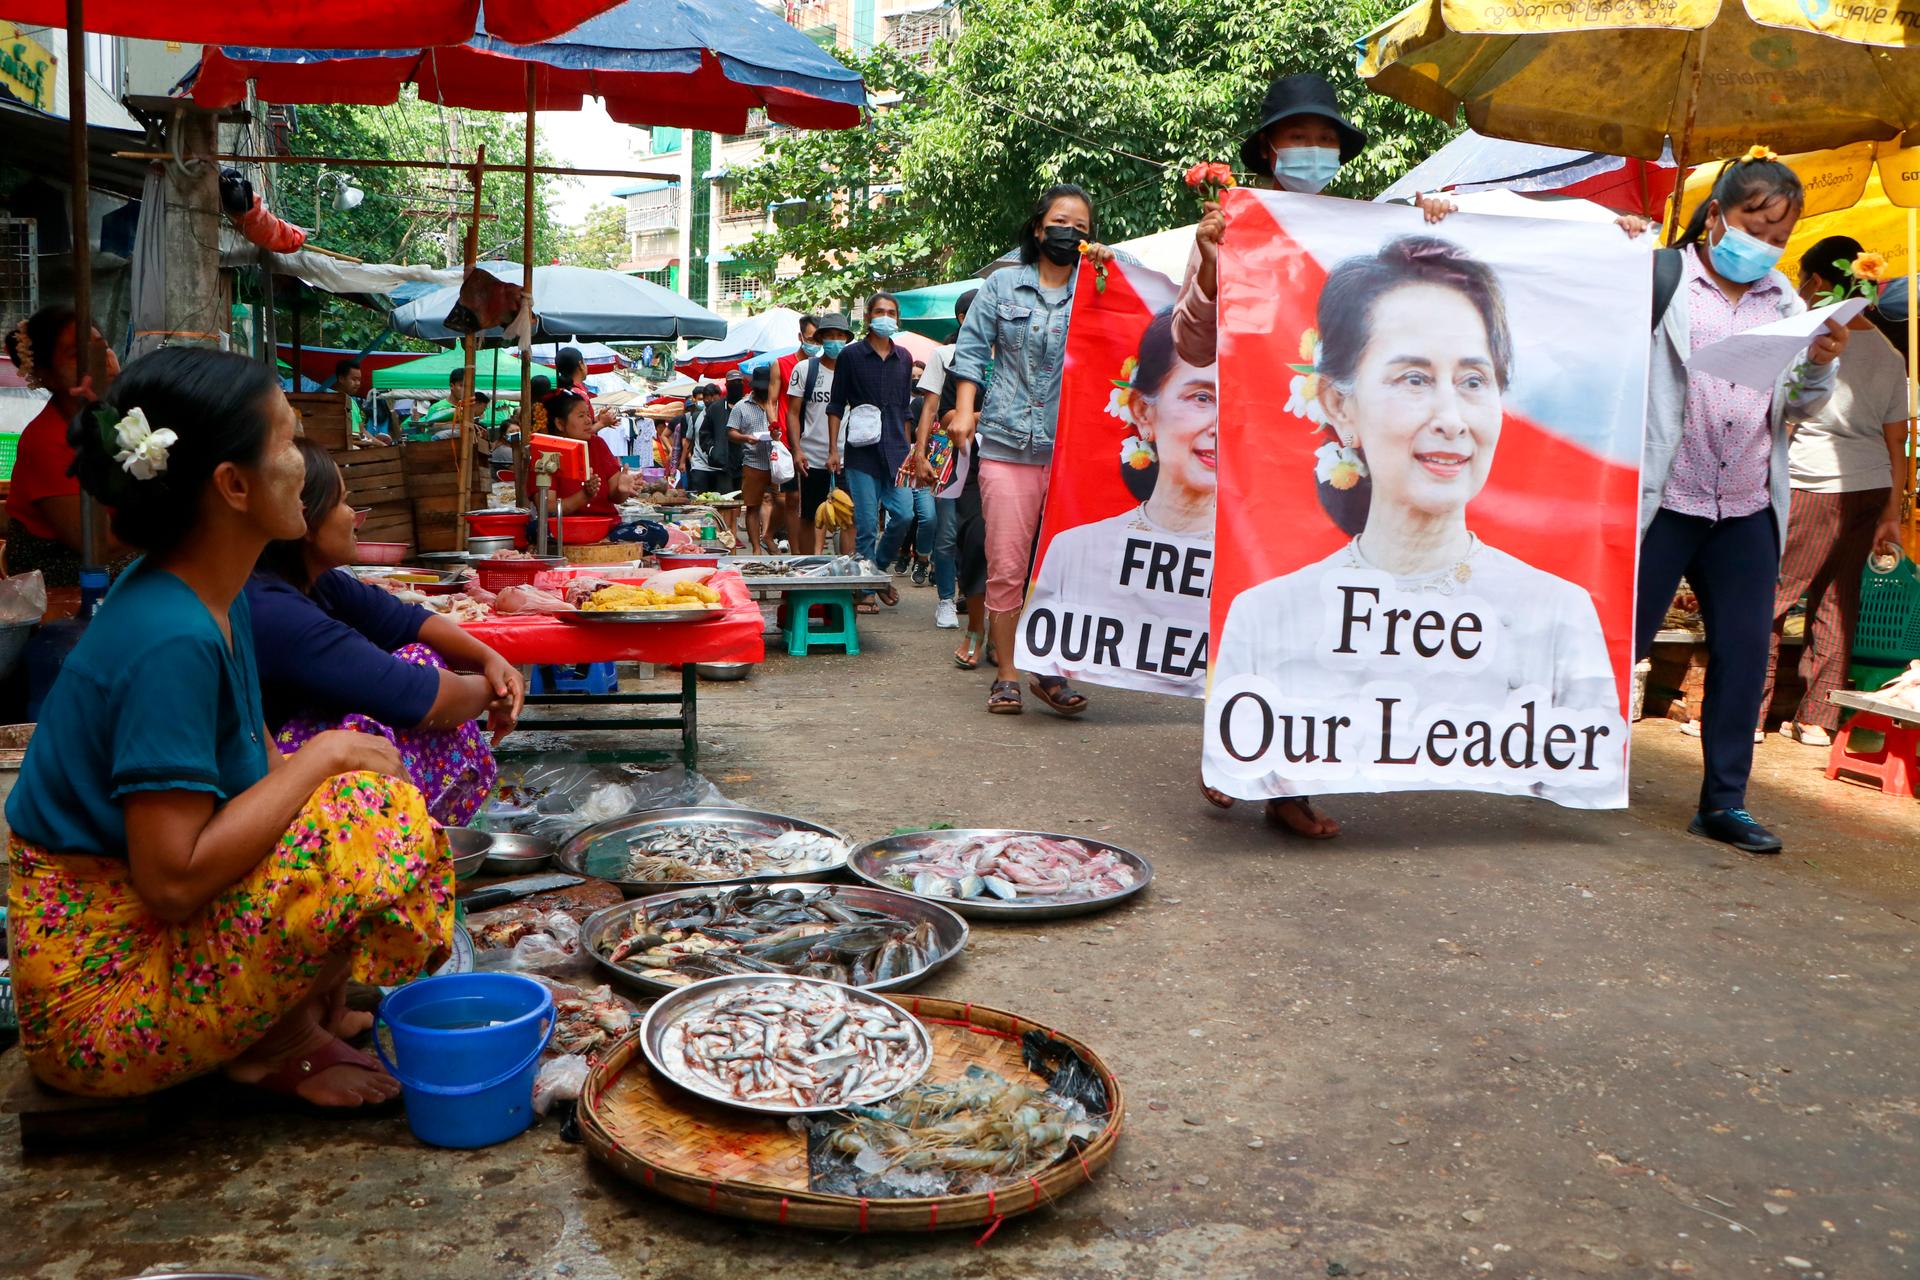 Anti-coup protesters walk through a market with images of ousted Myanmar leader Aung San Suu Kyi at Kamayut township in Yangon, Myanmar, April 8, 2021. They walked through the markets and streets of Kamayut township with slogans to show their disaffection